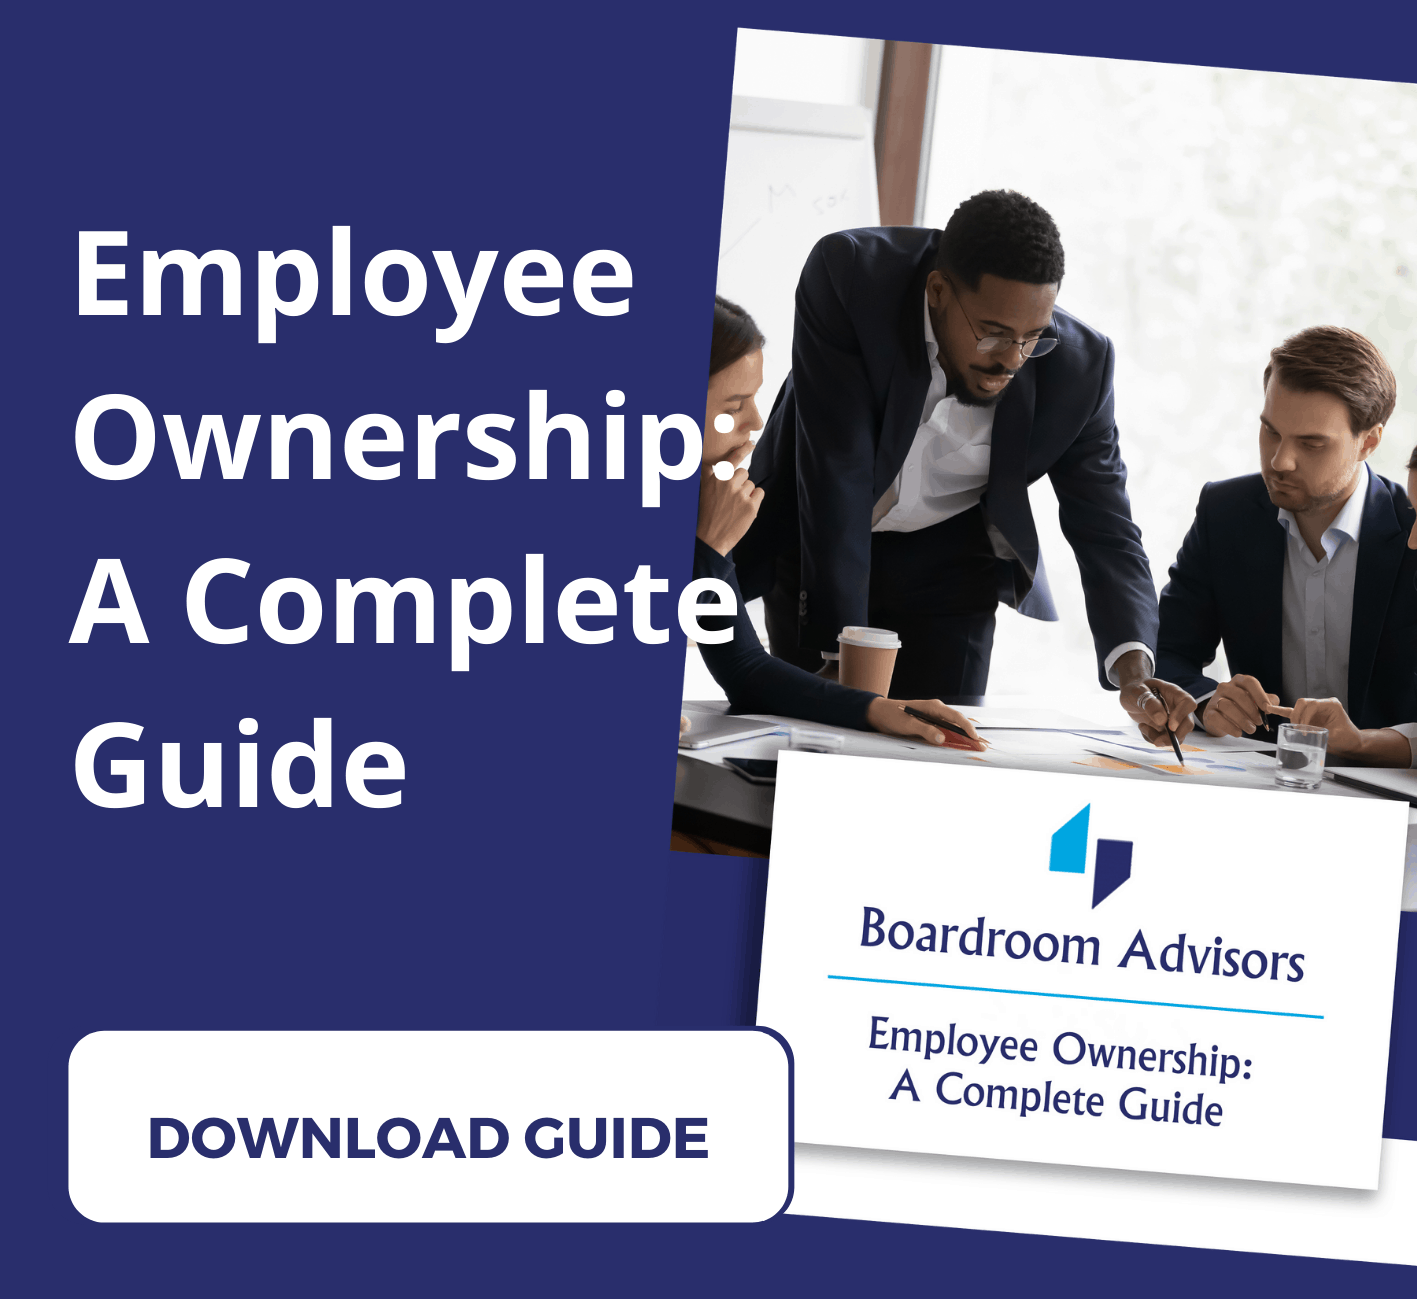 Employee Ownership: A Complete Guide